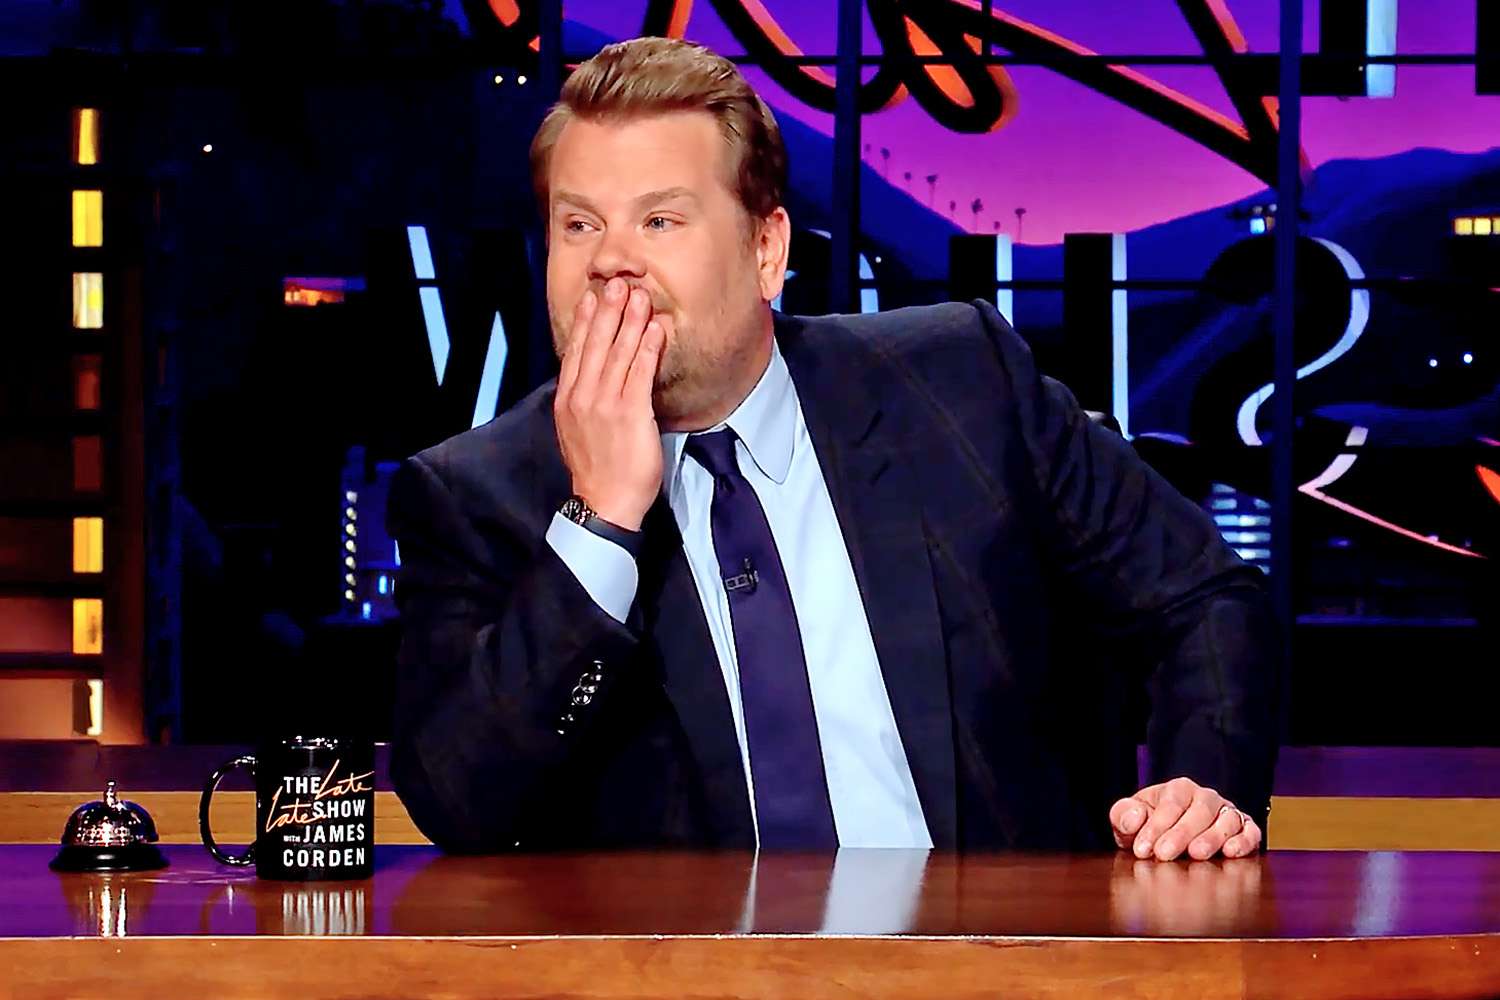 CBS Could Not Afford 'The Late Late Show With James Corden'